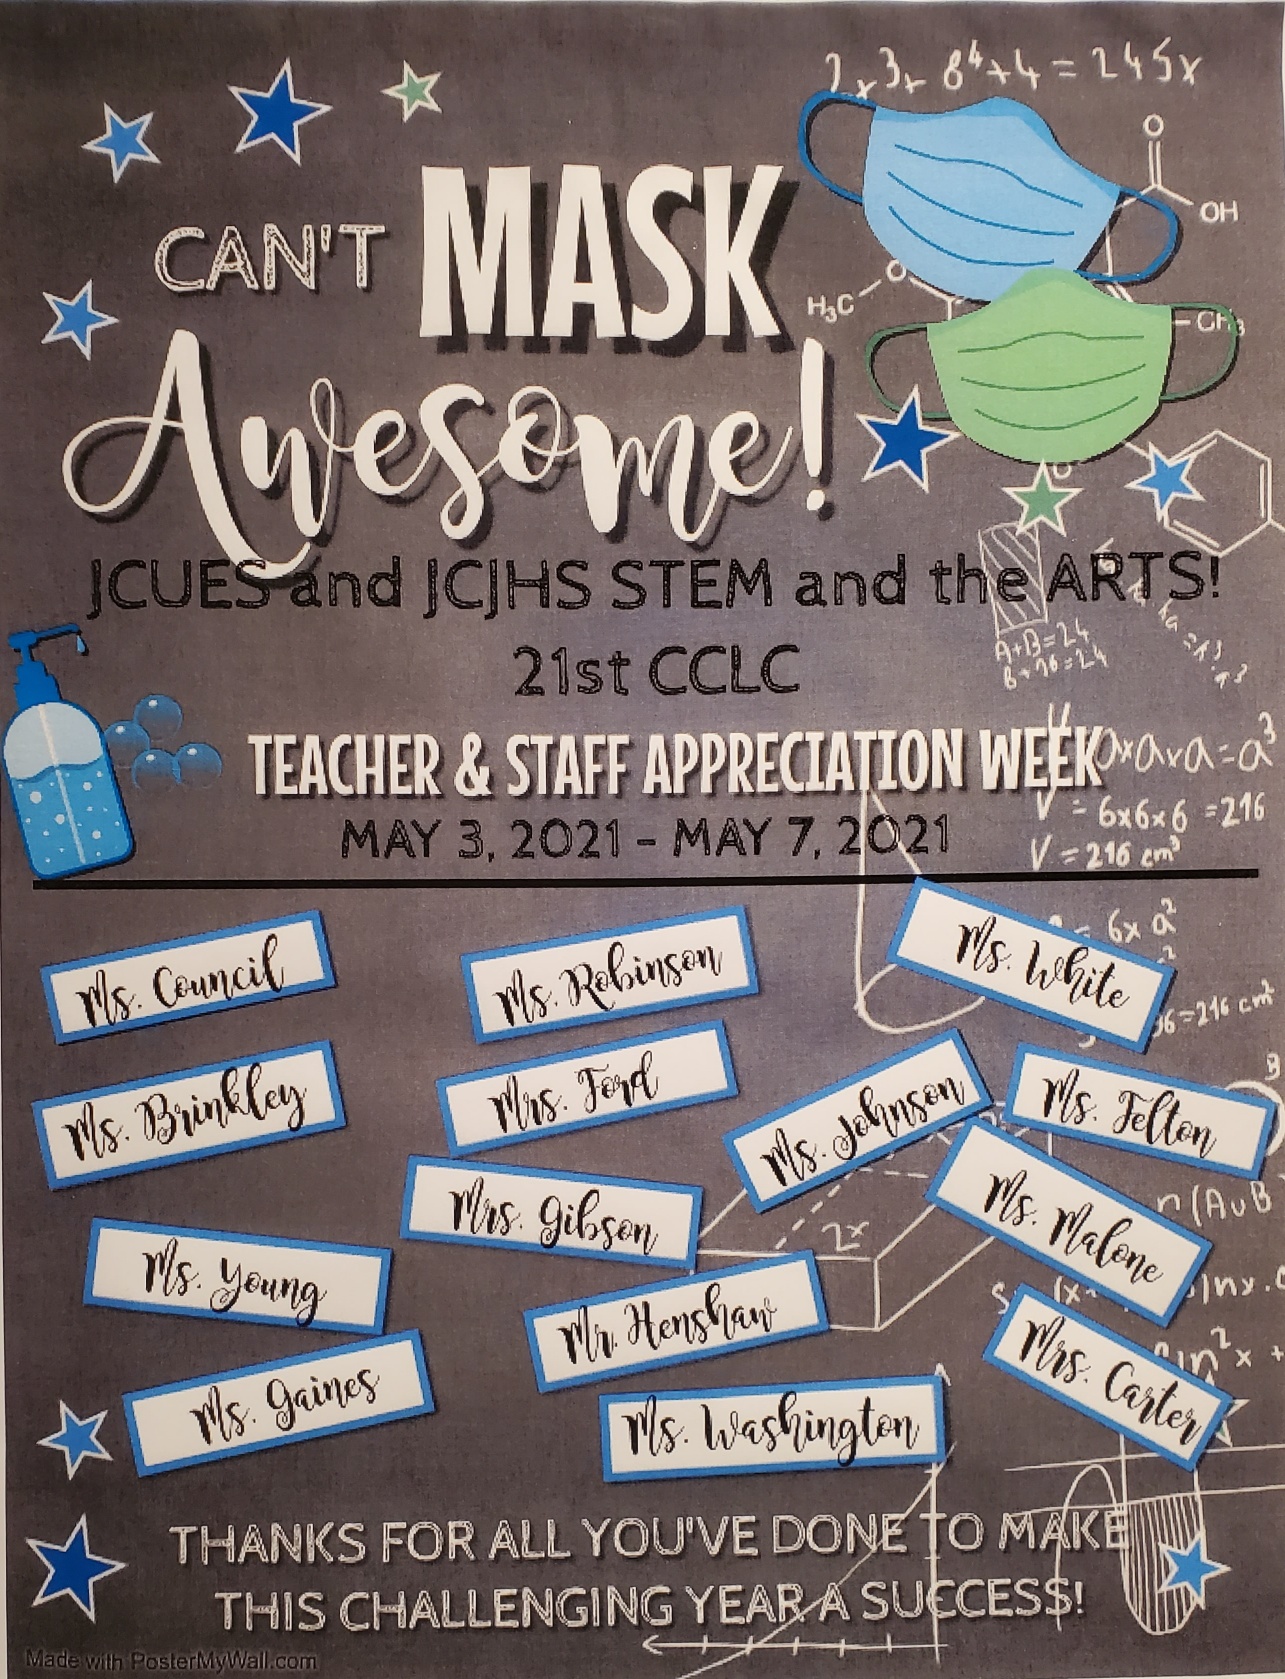 STEM and the Arts!